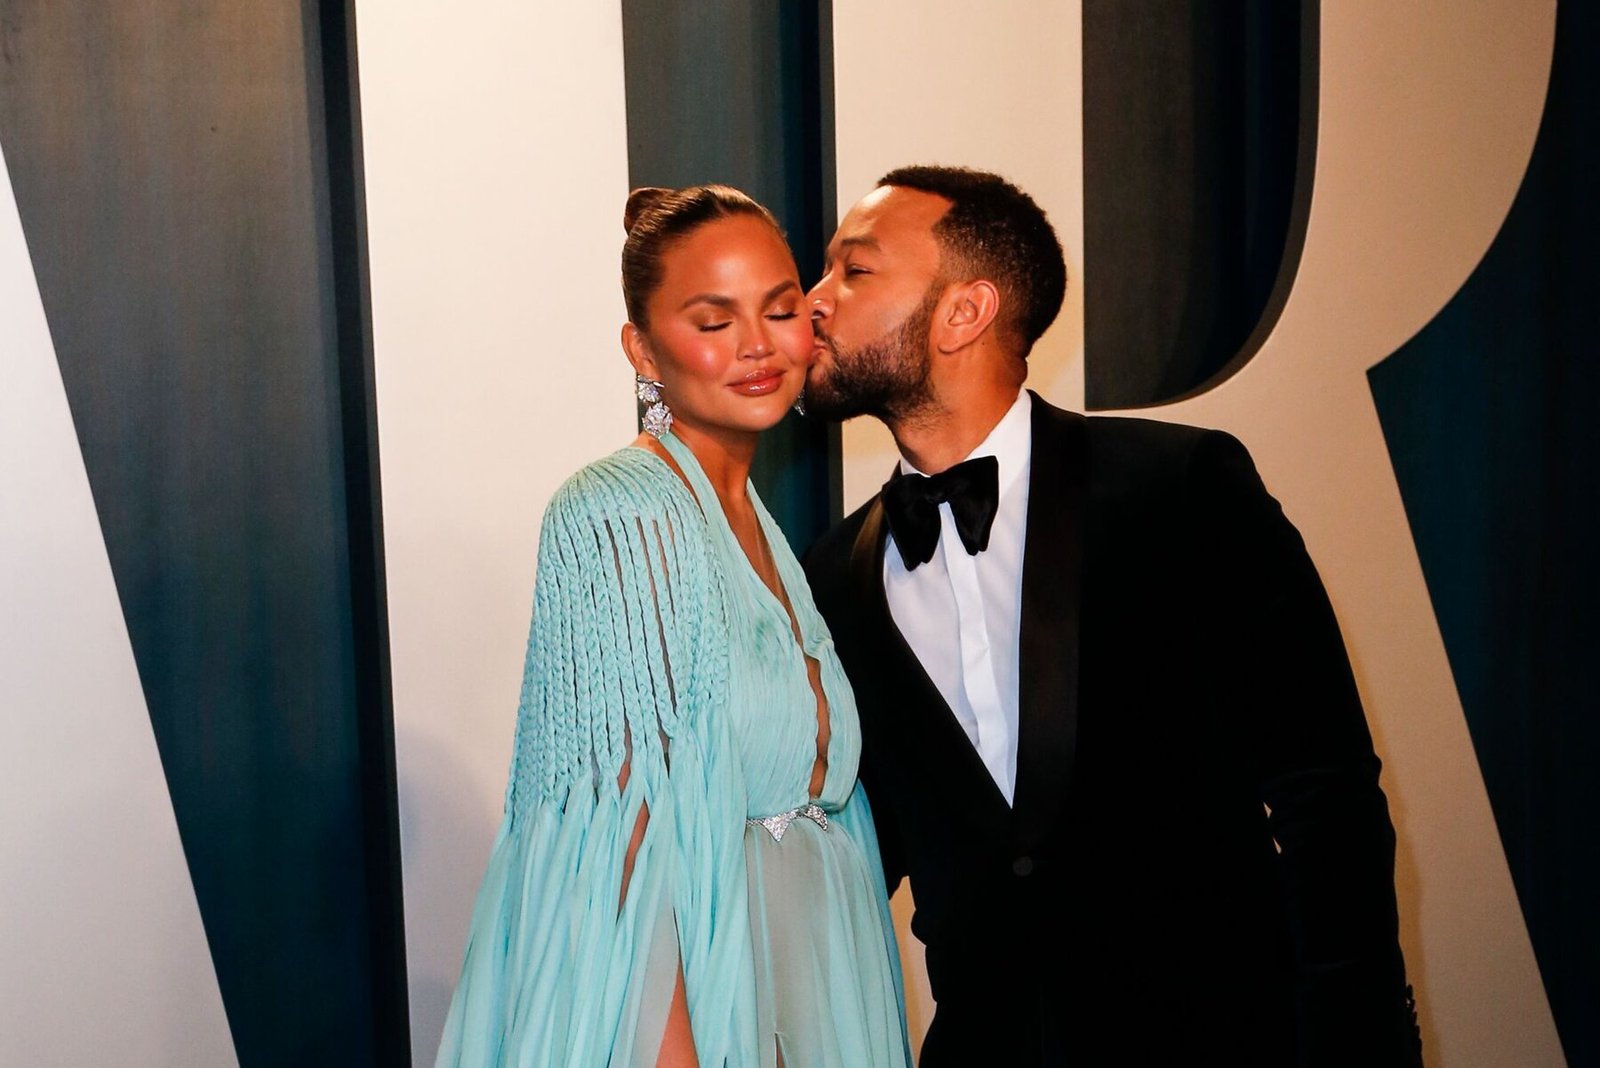 Chrissy Teigen joins 50 days without alcohol: Losing baby's ruined her, finally getting better